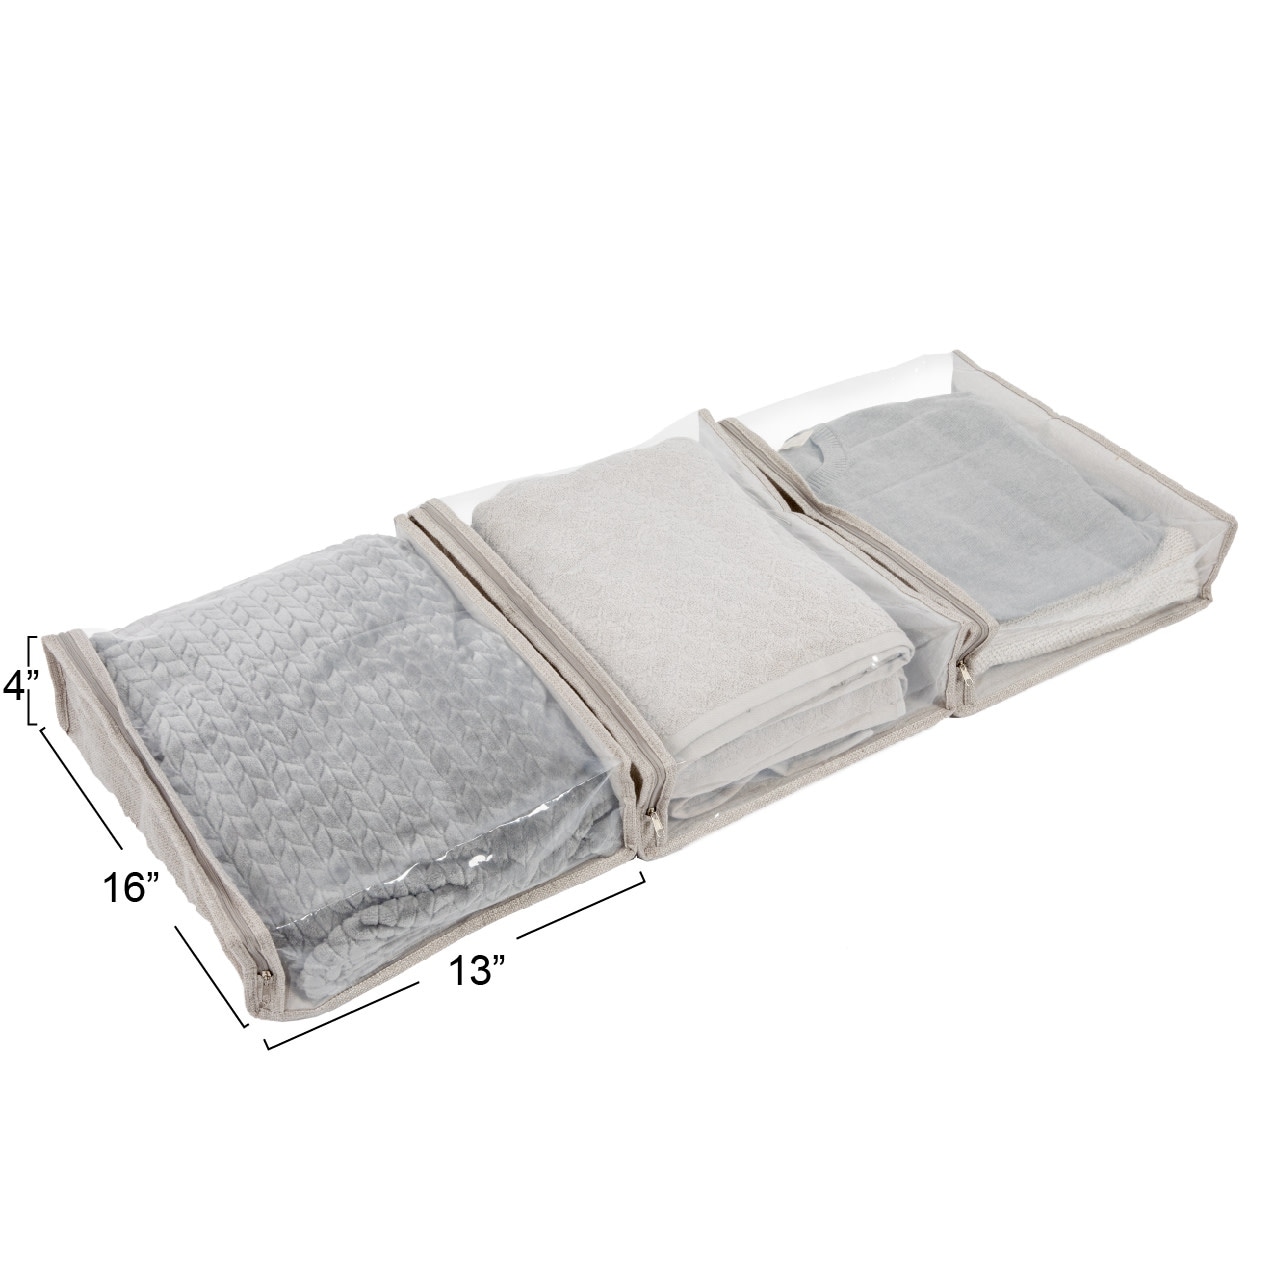 https://ak1.ostkcdn.com/images/products/is/images/direct/54c6e2ed0cbadc151fa12876429baaf2d7297ad6/Zippered-Sweater-Storage-Bags-with-Clear-Vision-Panel.jpg